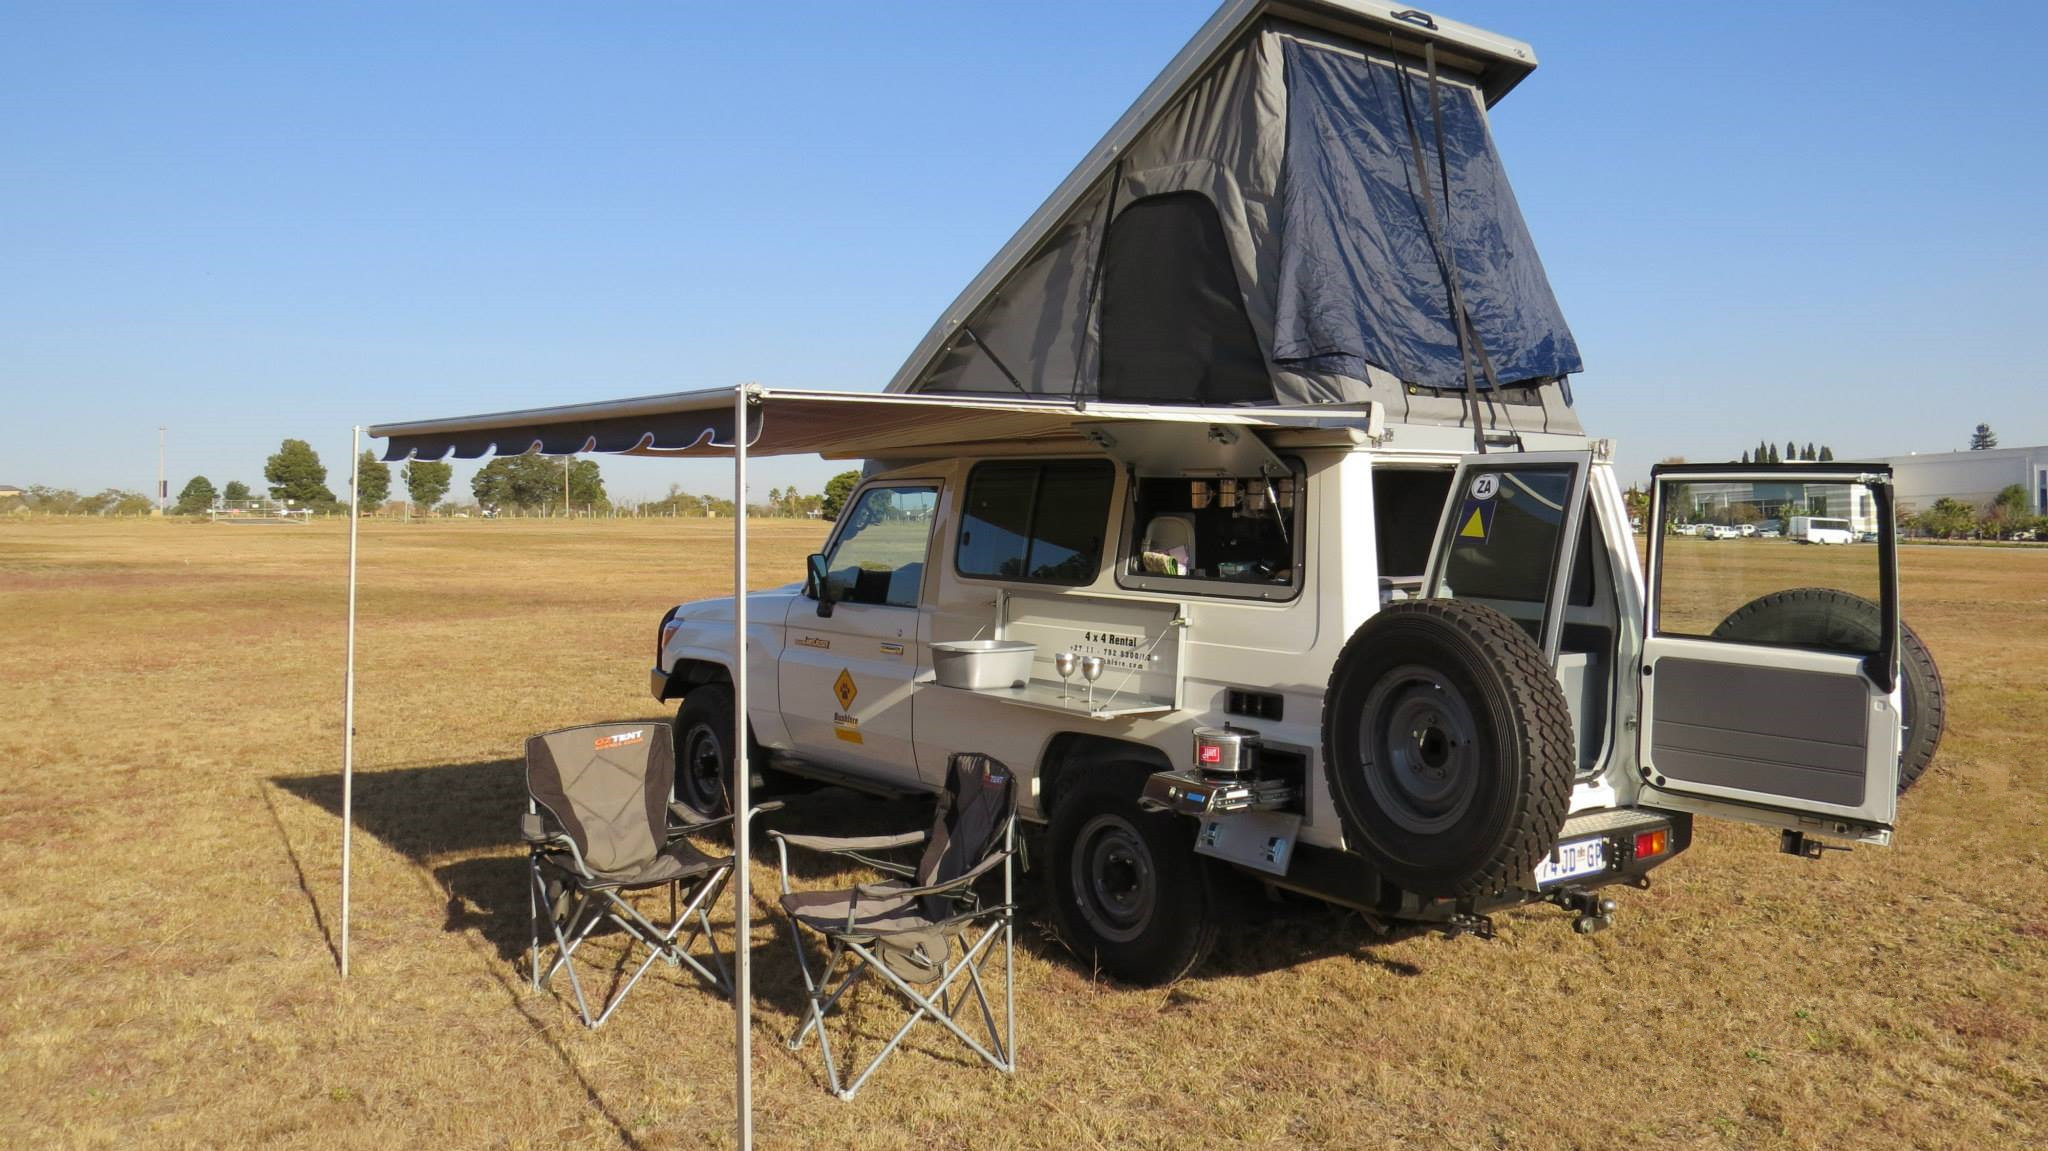  Off Road Hard Shell Roof Top Tent Side Open ABS Shell Material For 3-4 Person Manufactures